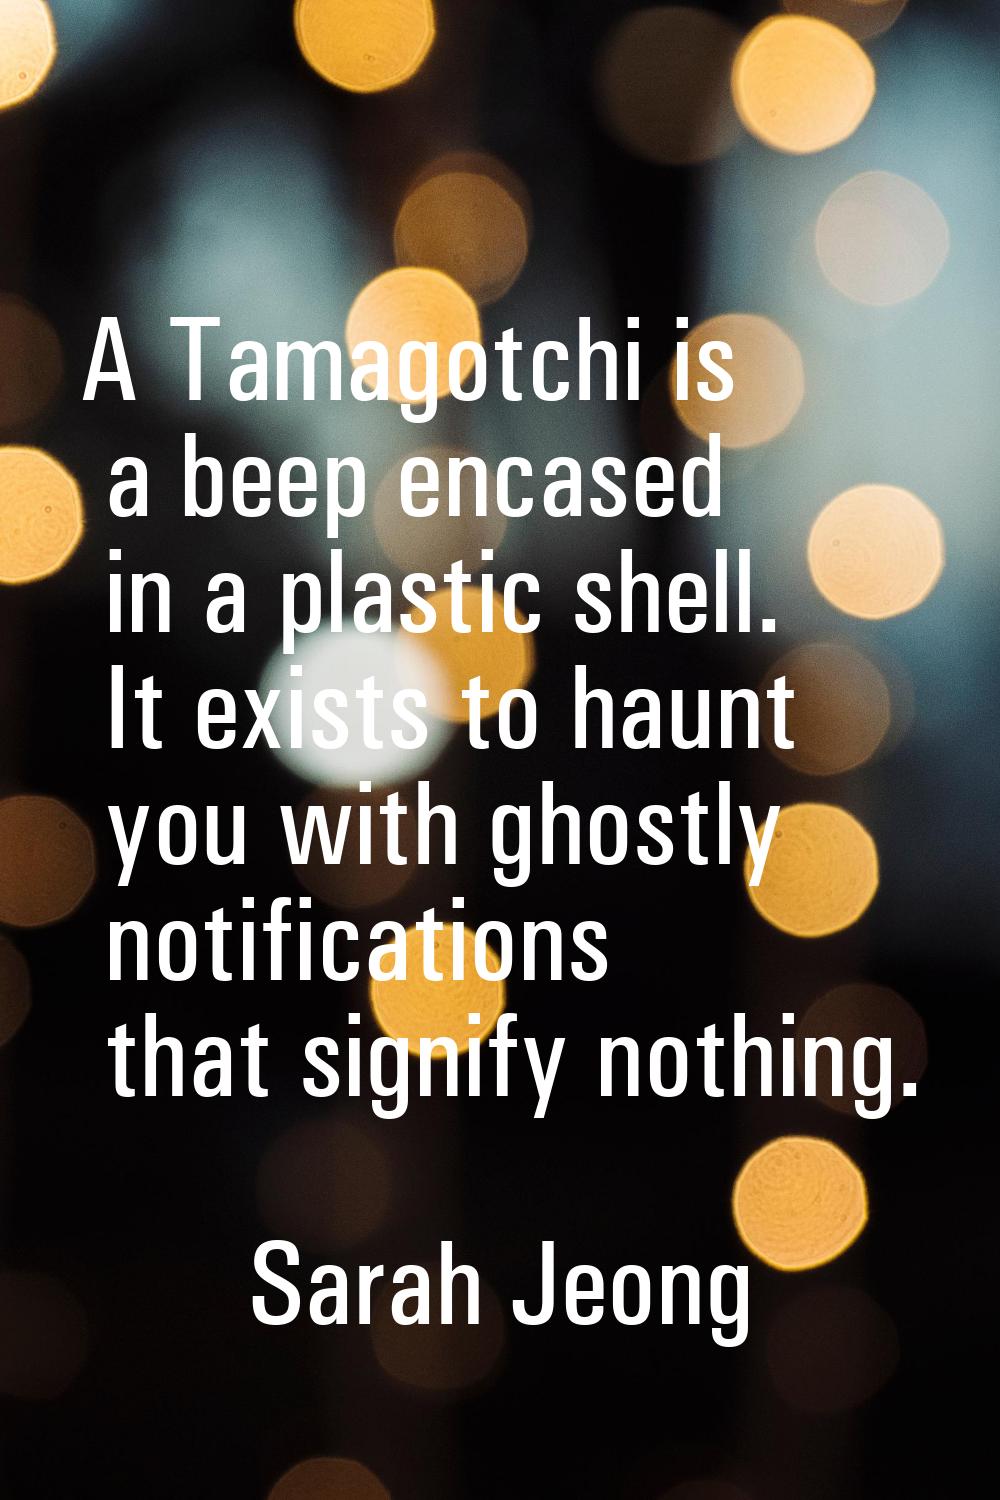 A Tamagotchi is a beep encased in a plastic shell. It exists to haunt you with ghostly notification